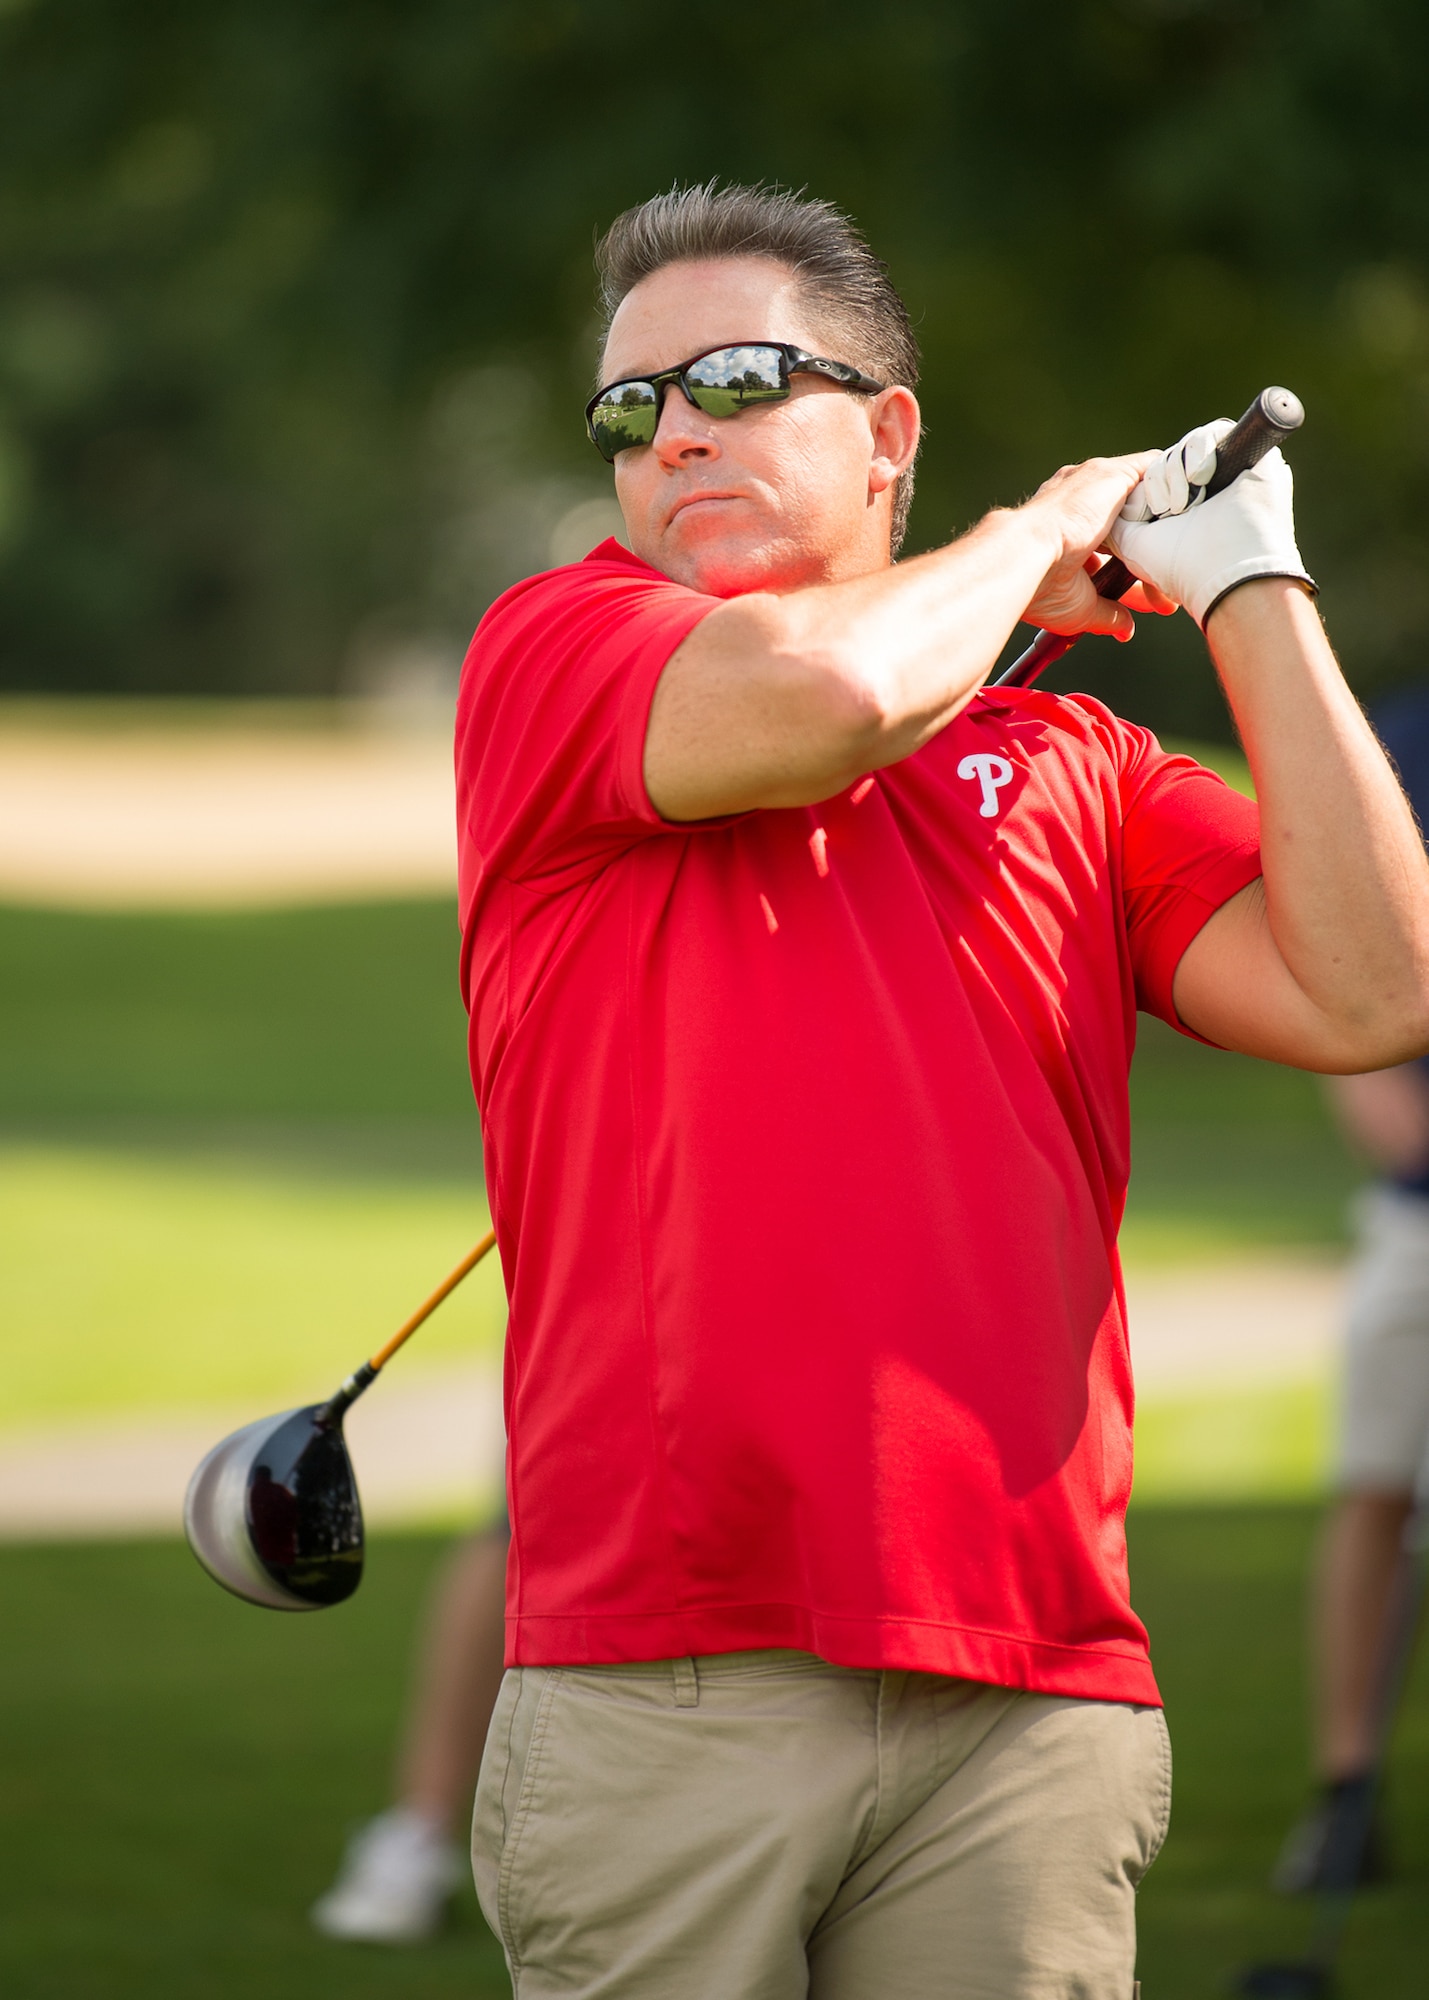 Tim Horne, Dover Motorsports, tees off during the Bluesuiters Golf Tournament Sept. 19, 2018, at the Eagle Creek Golf Course on Dover Air Force Base, Del. The biannual tournament also features raffles, door prizes and a lunch at the clubhouse.